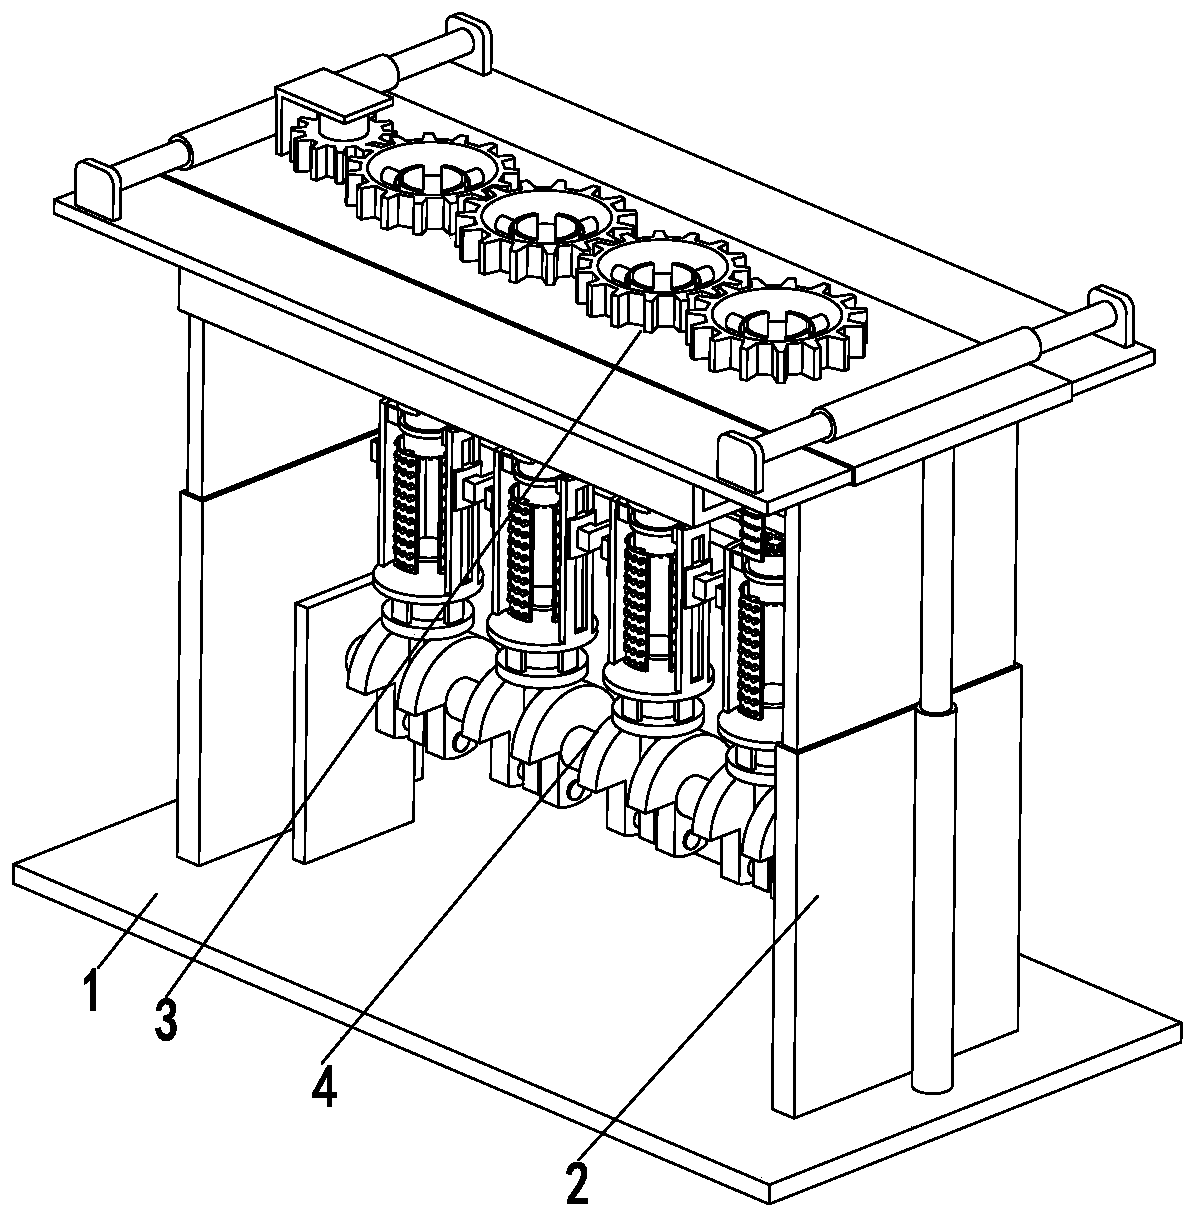 A treatment system for the inner wall of a plastic part and a treatment process for the inner wall of a plastic part